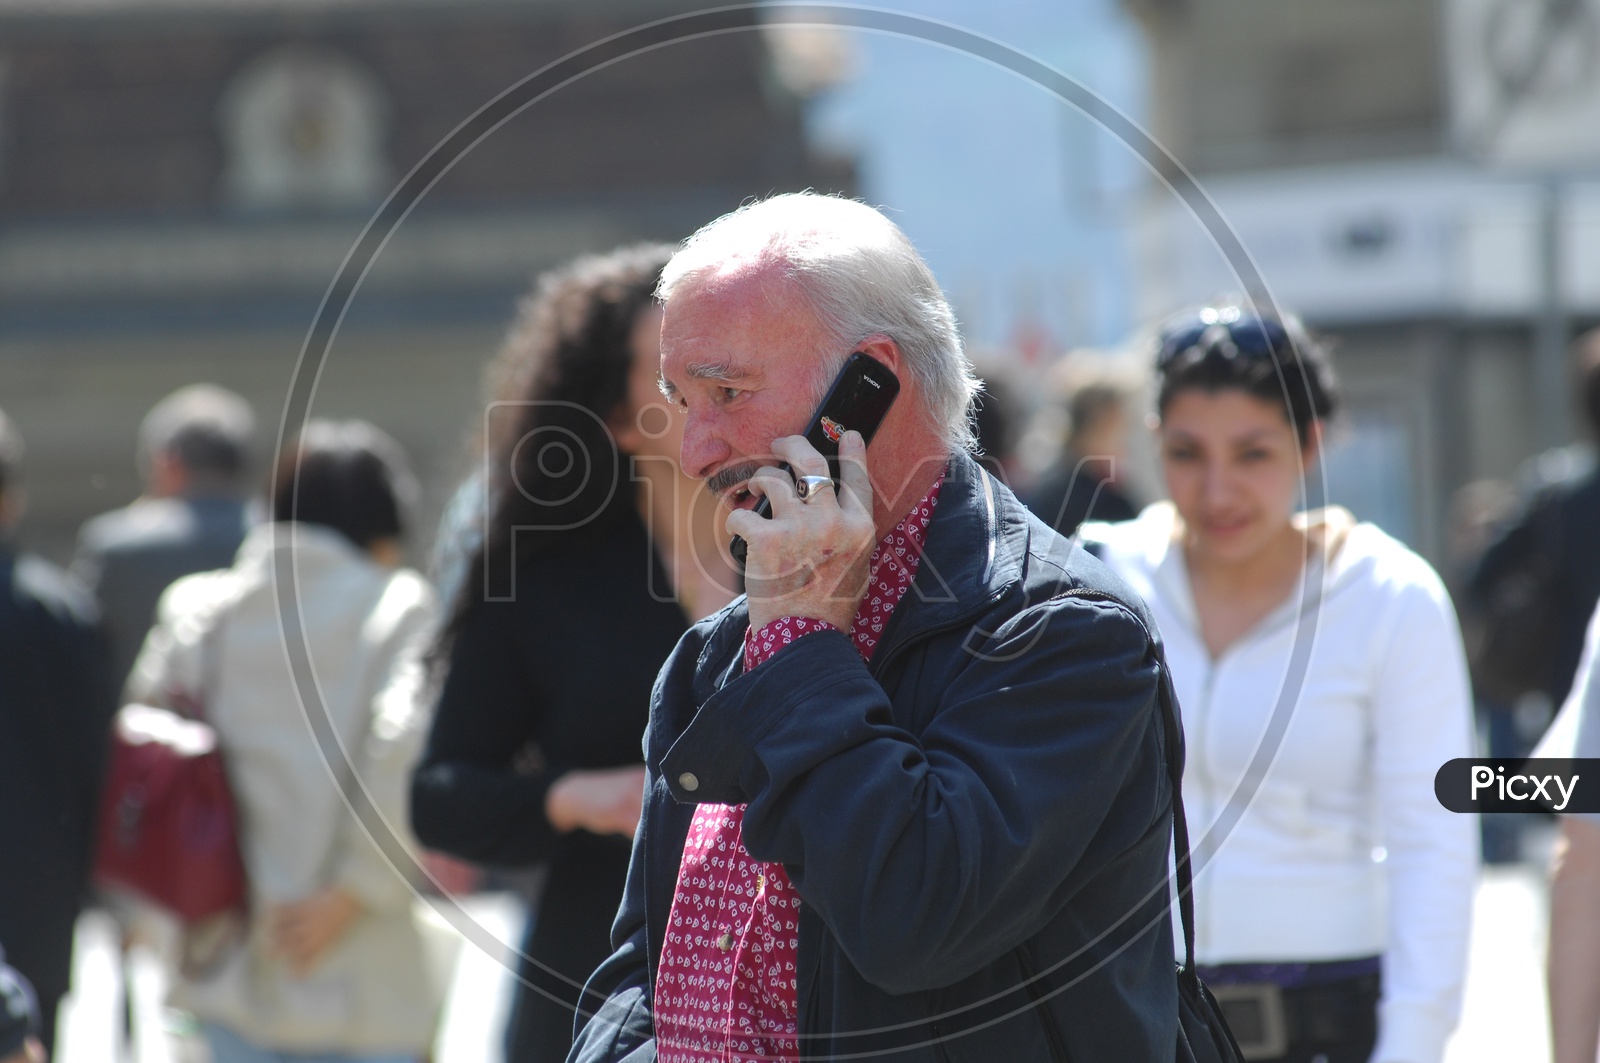 An old man taking over a phone